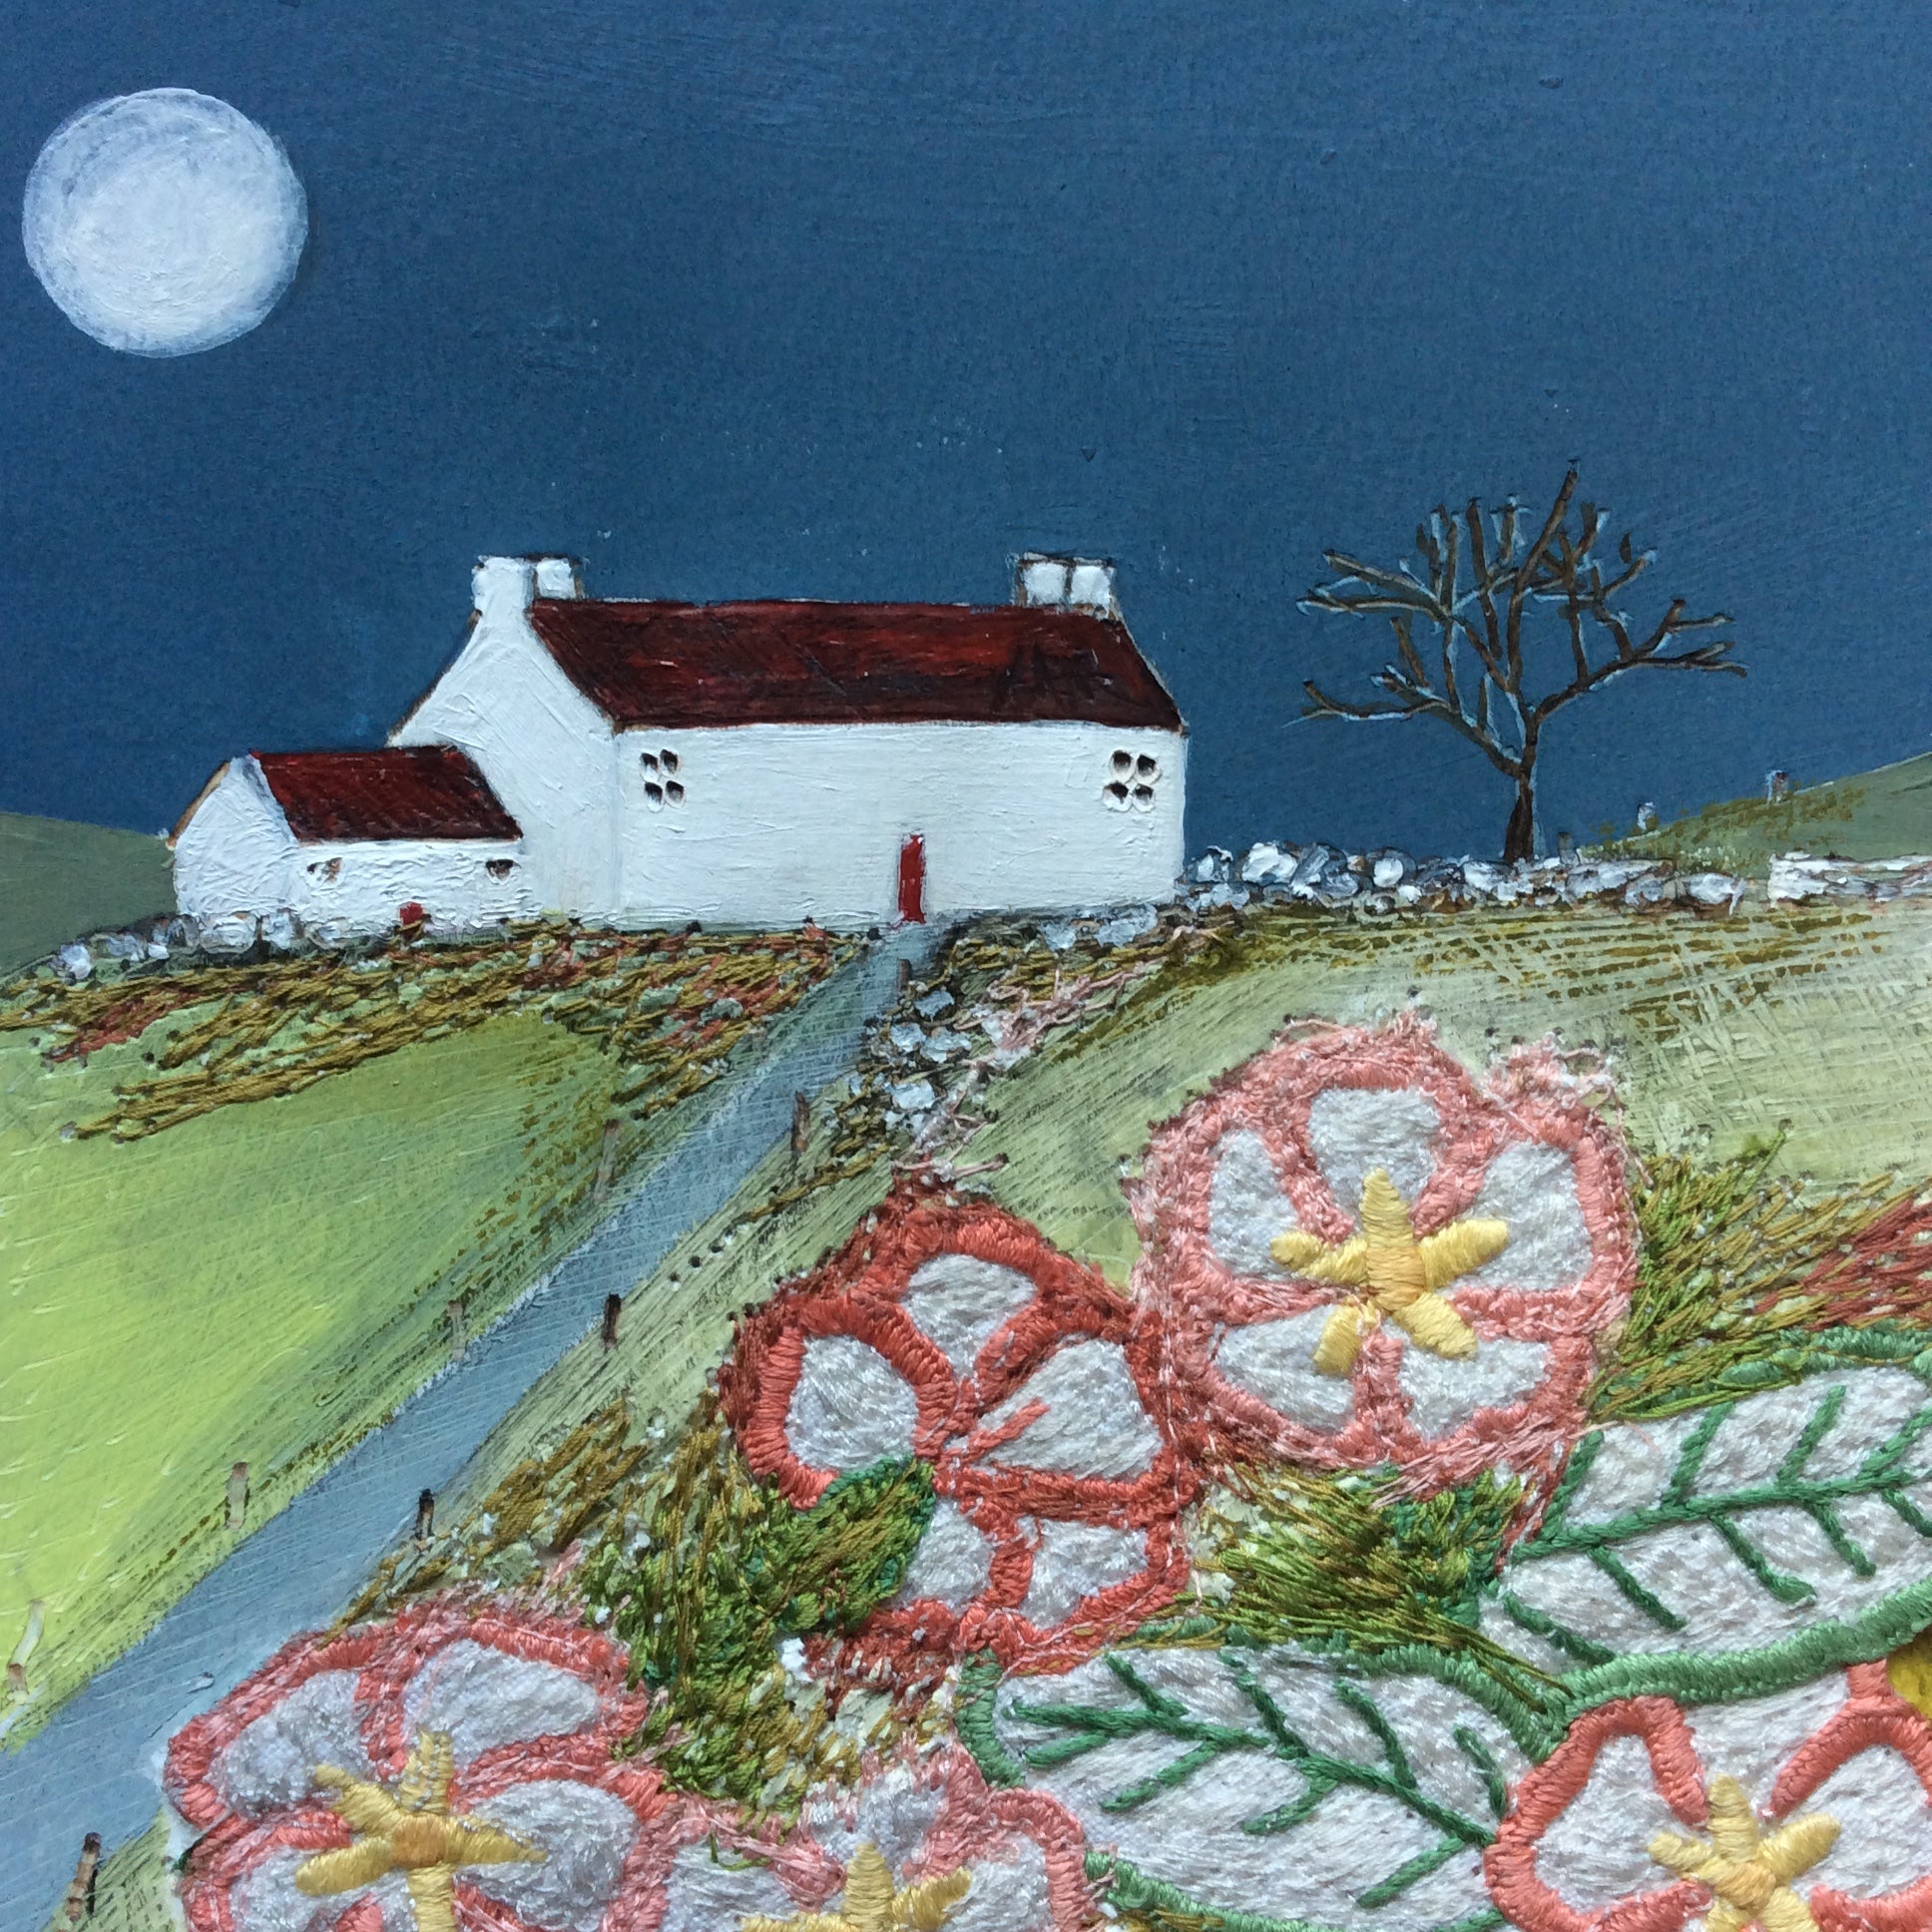 Mixed Media Art By Louise O'Hara - "The tree looks magical by the light of the moon"